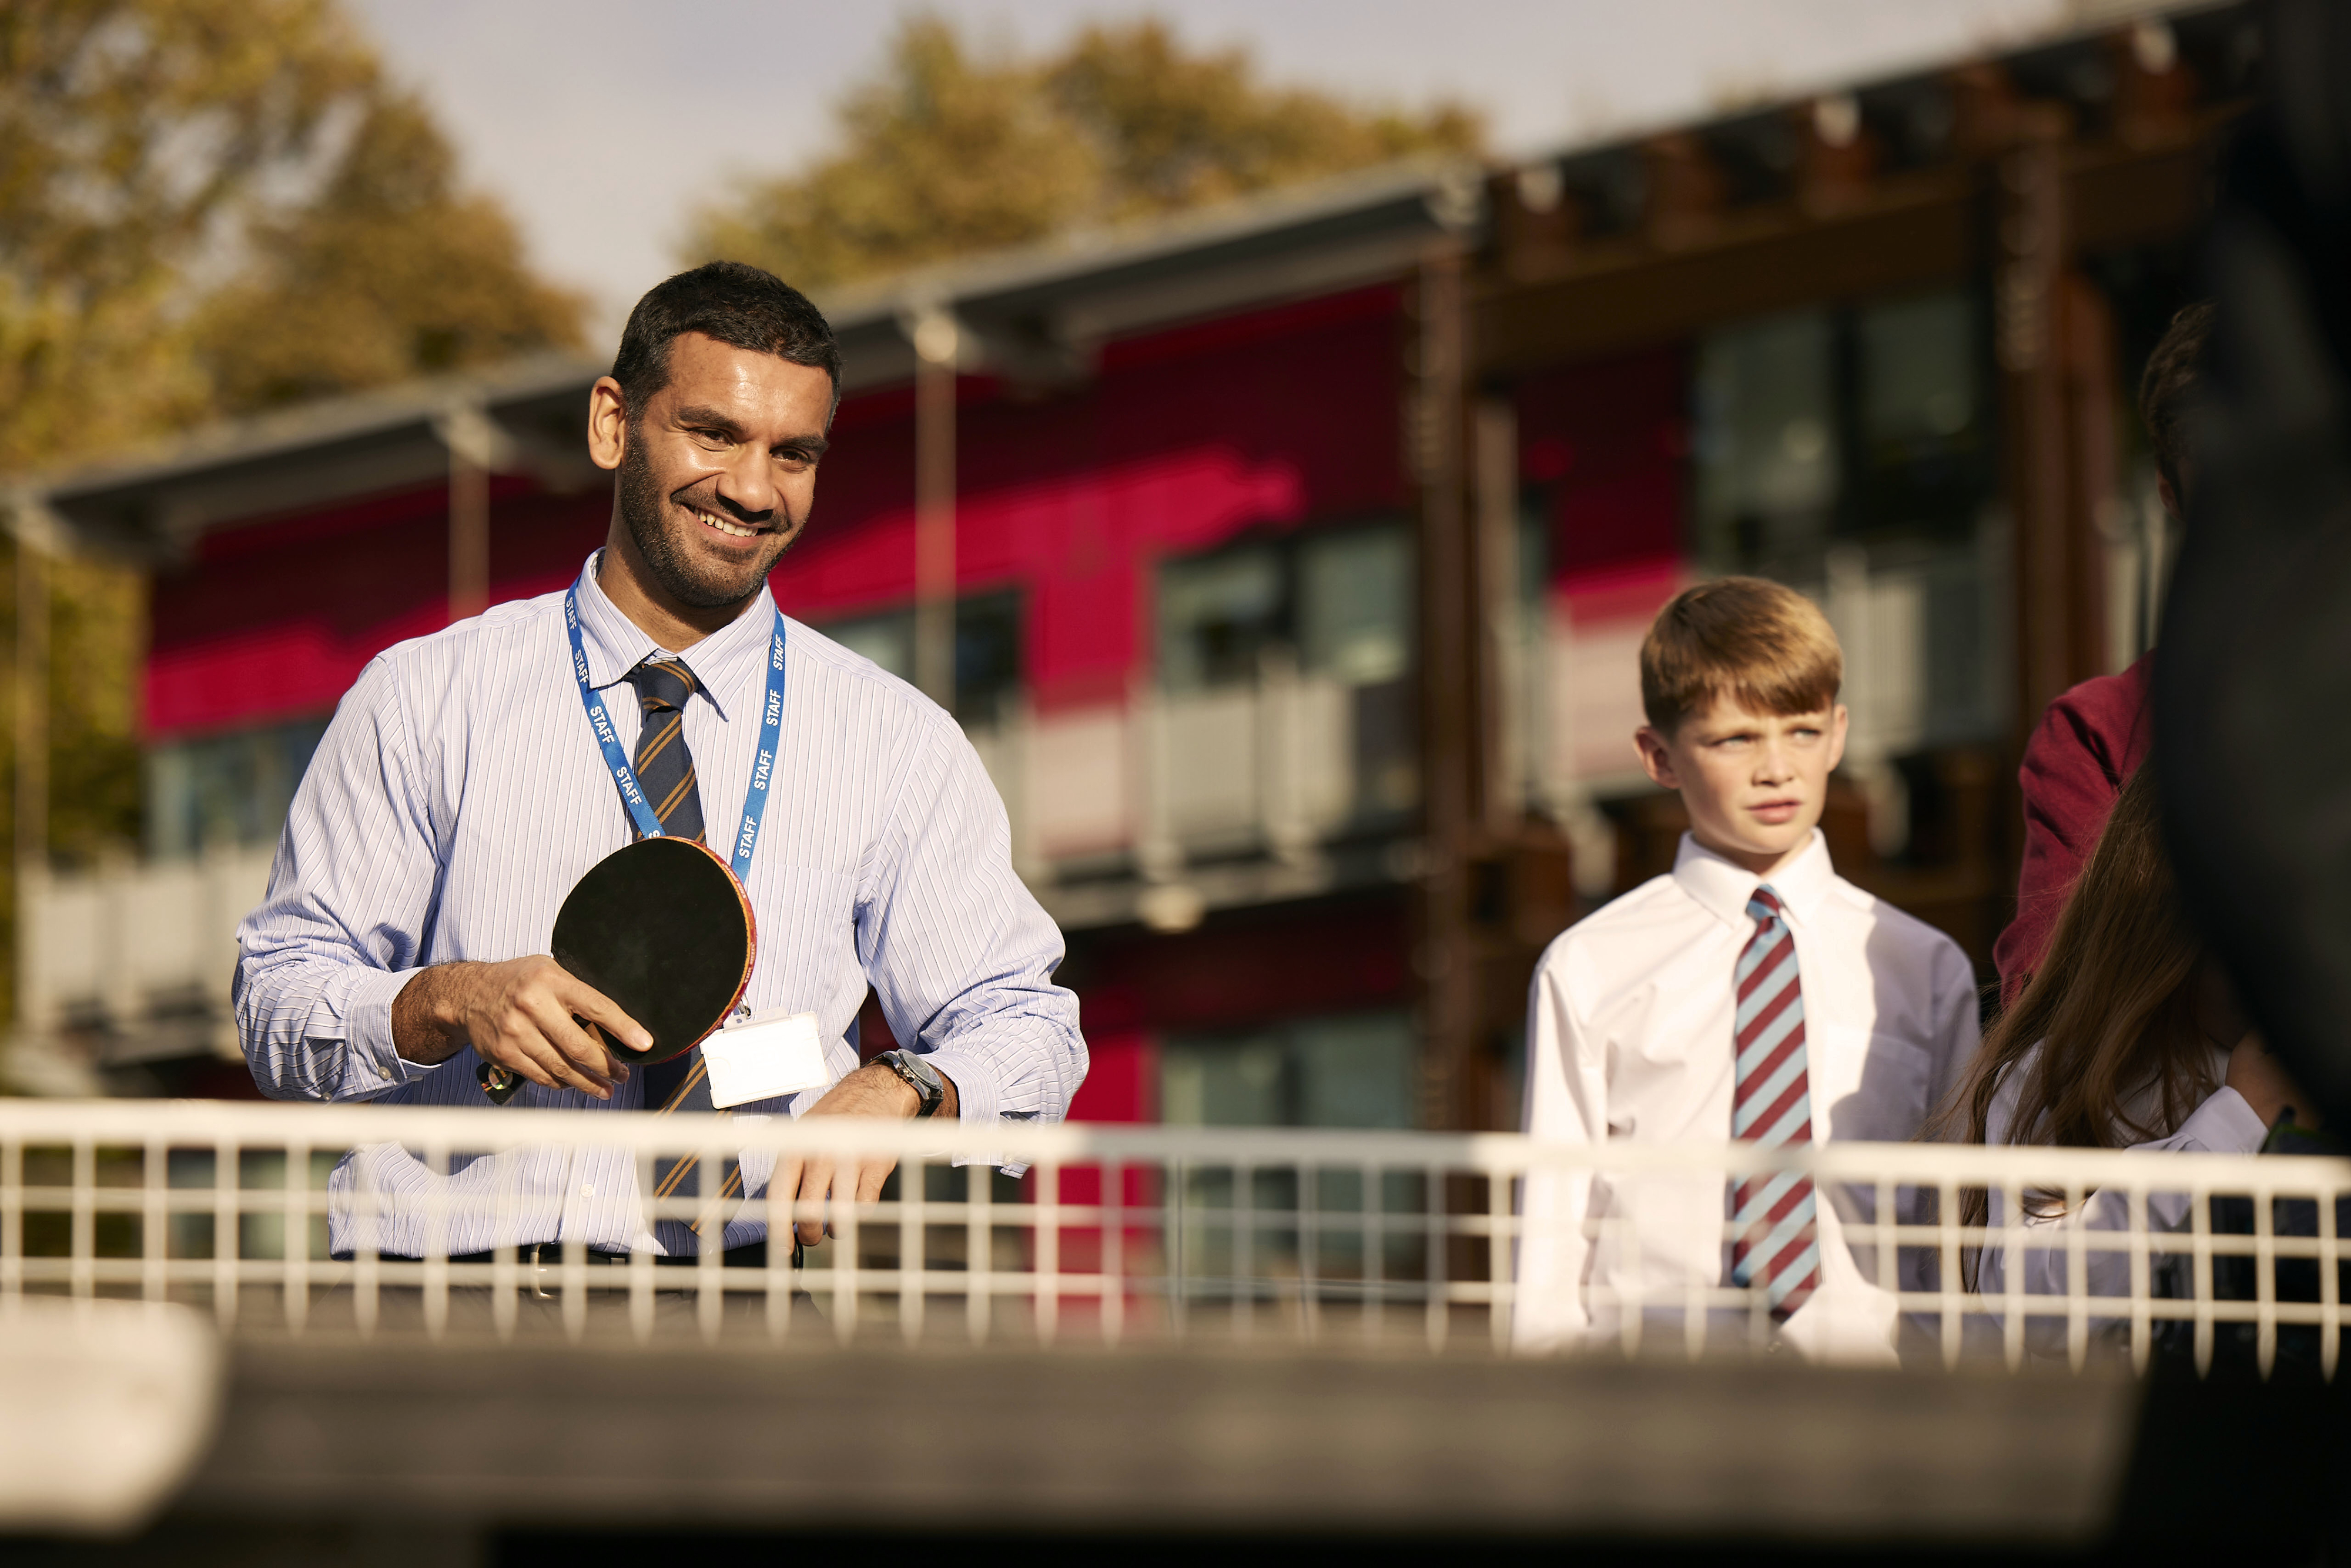 A teacher smiles while playing table tennis with students